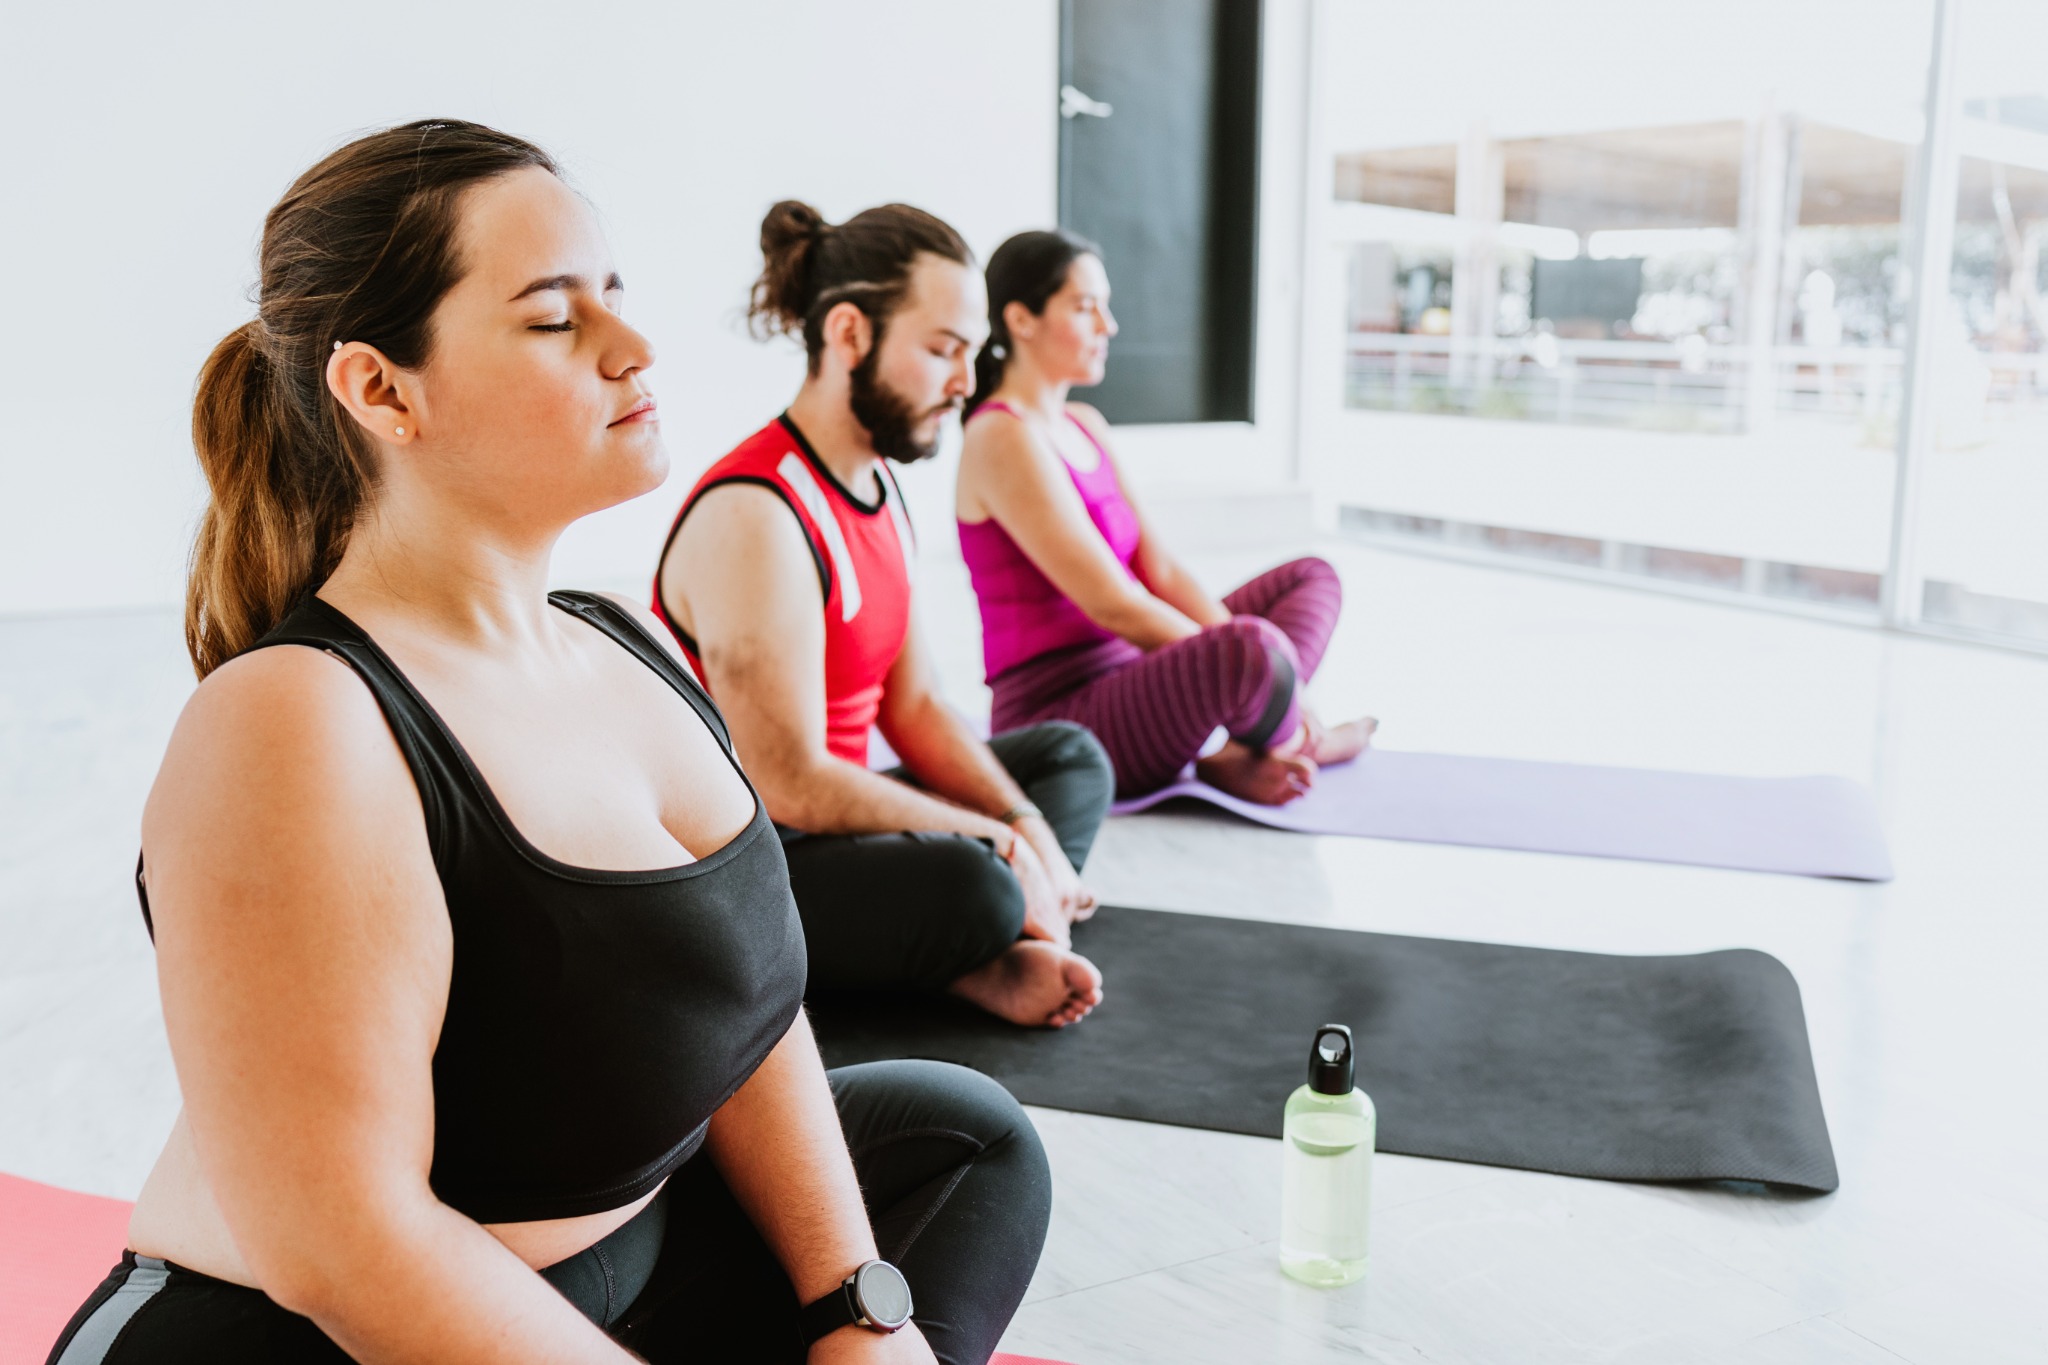 Image of two women and one man in a yoga class.